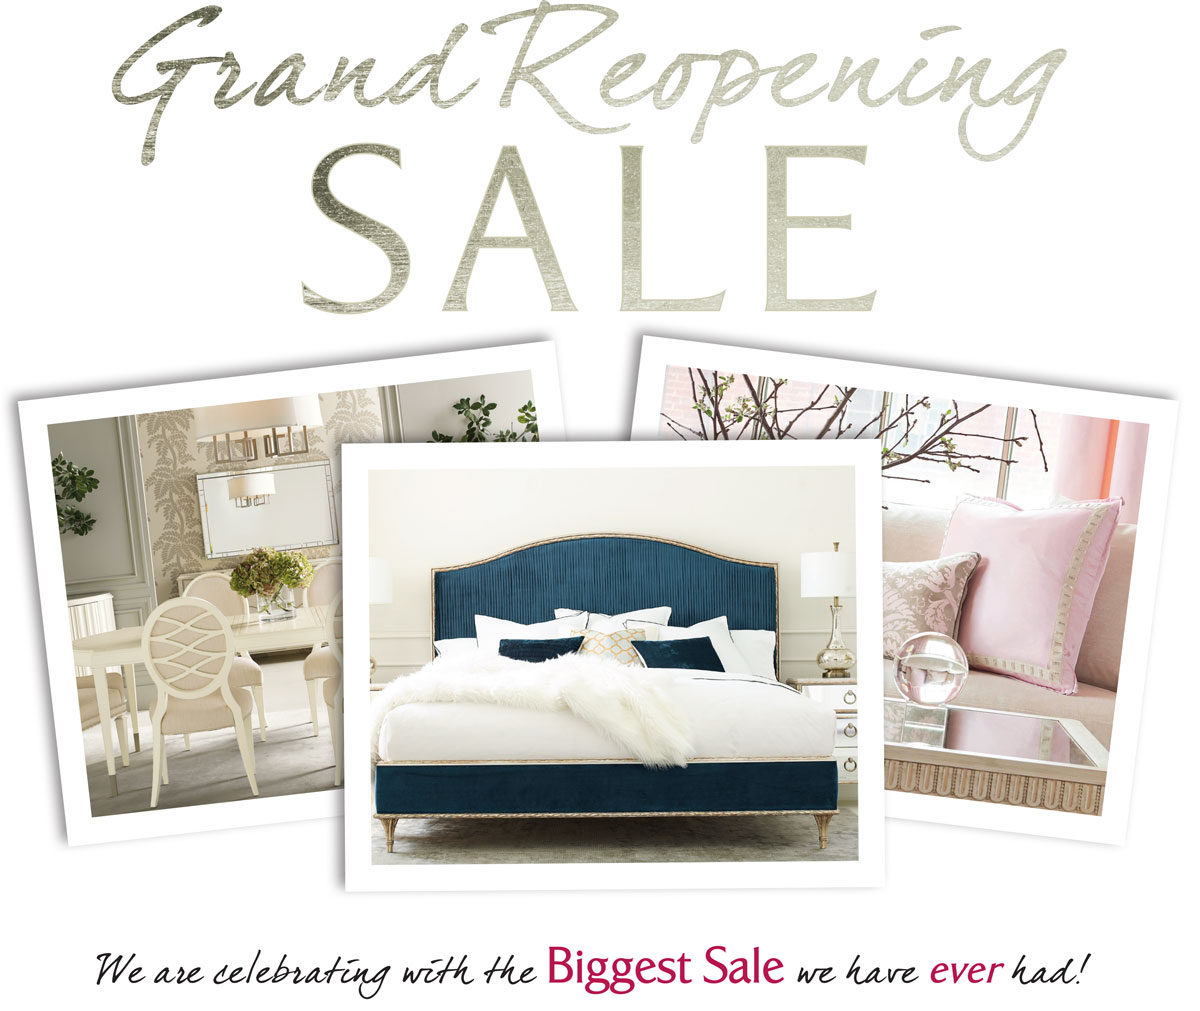 Grand Reopening Sale